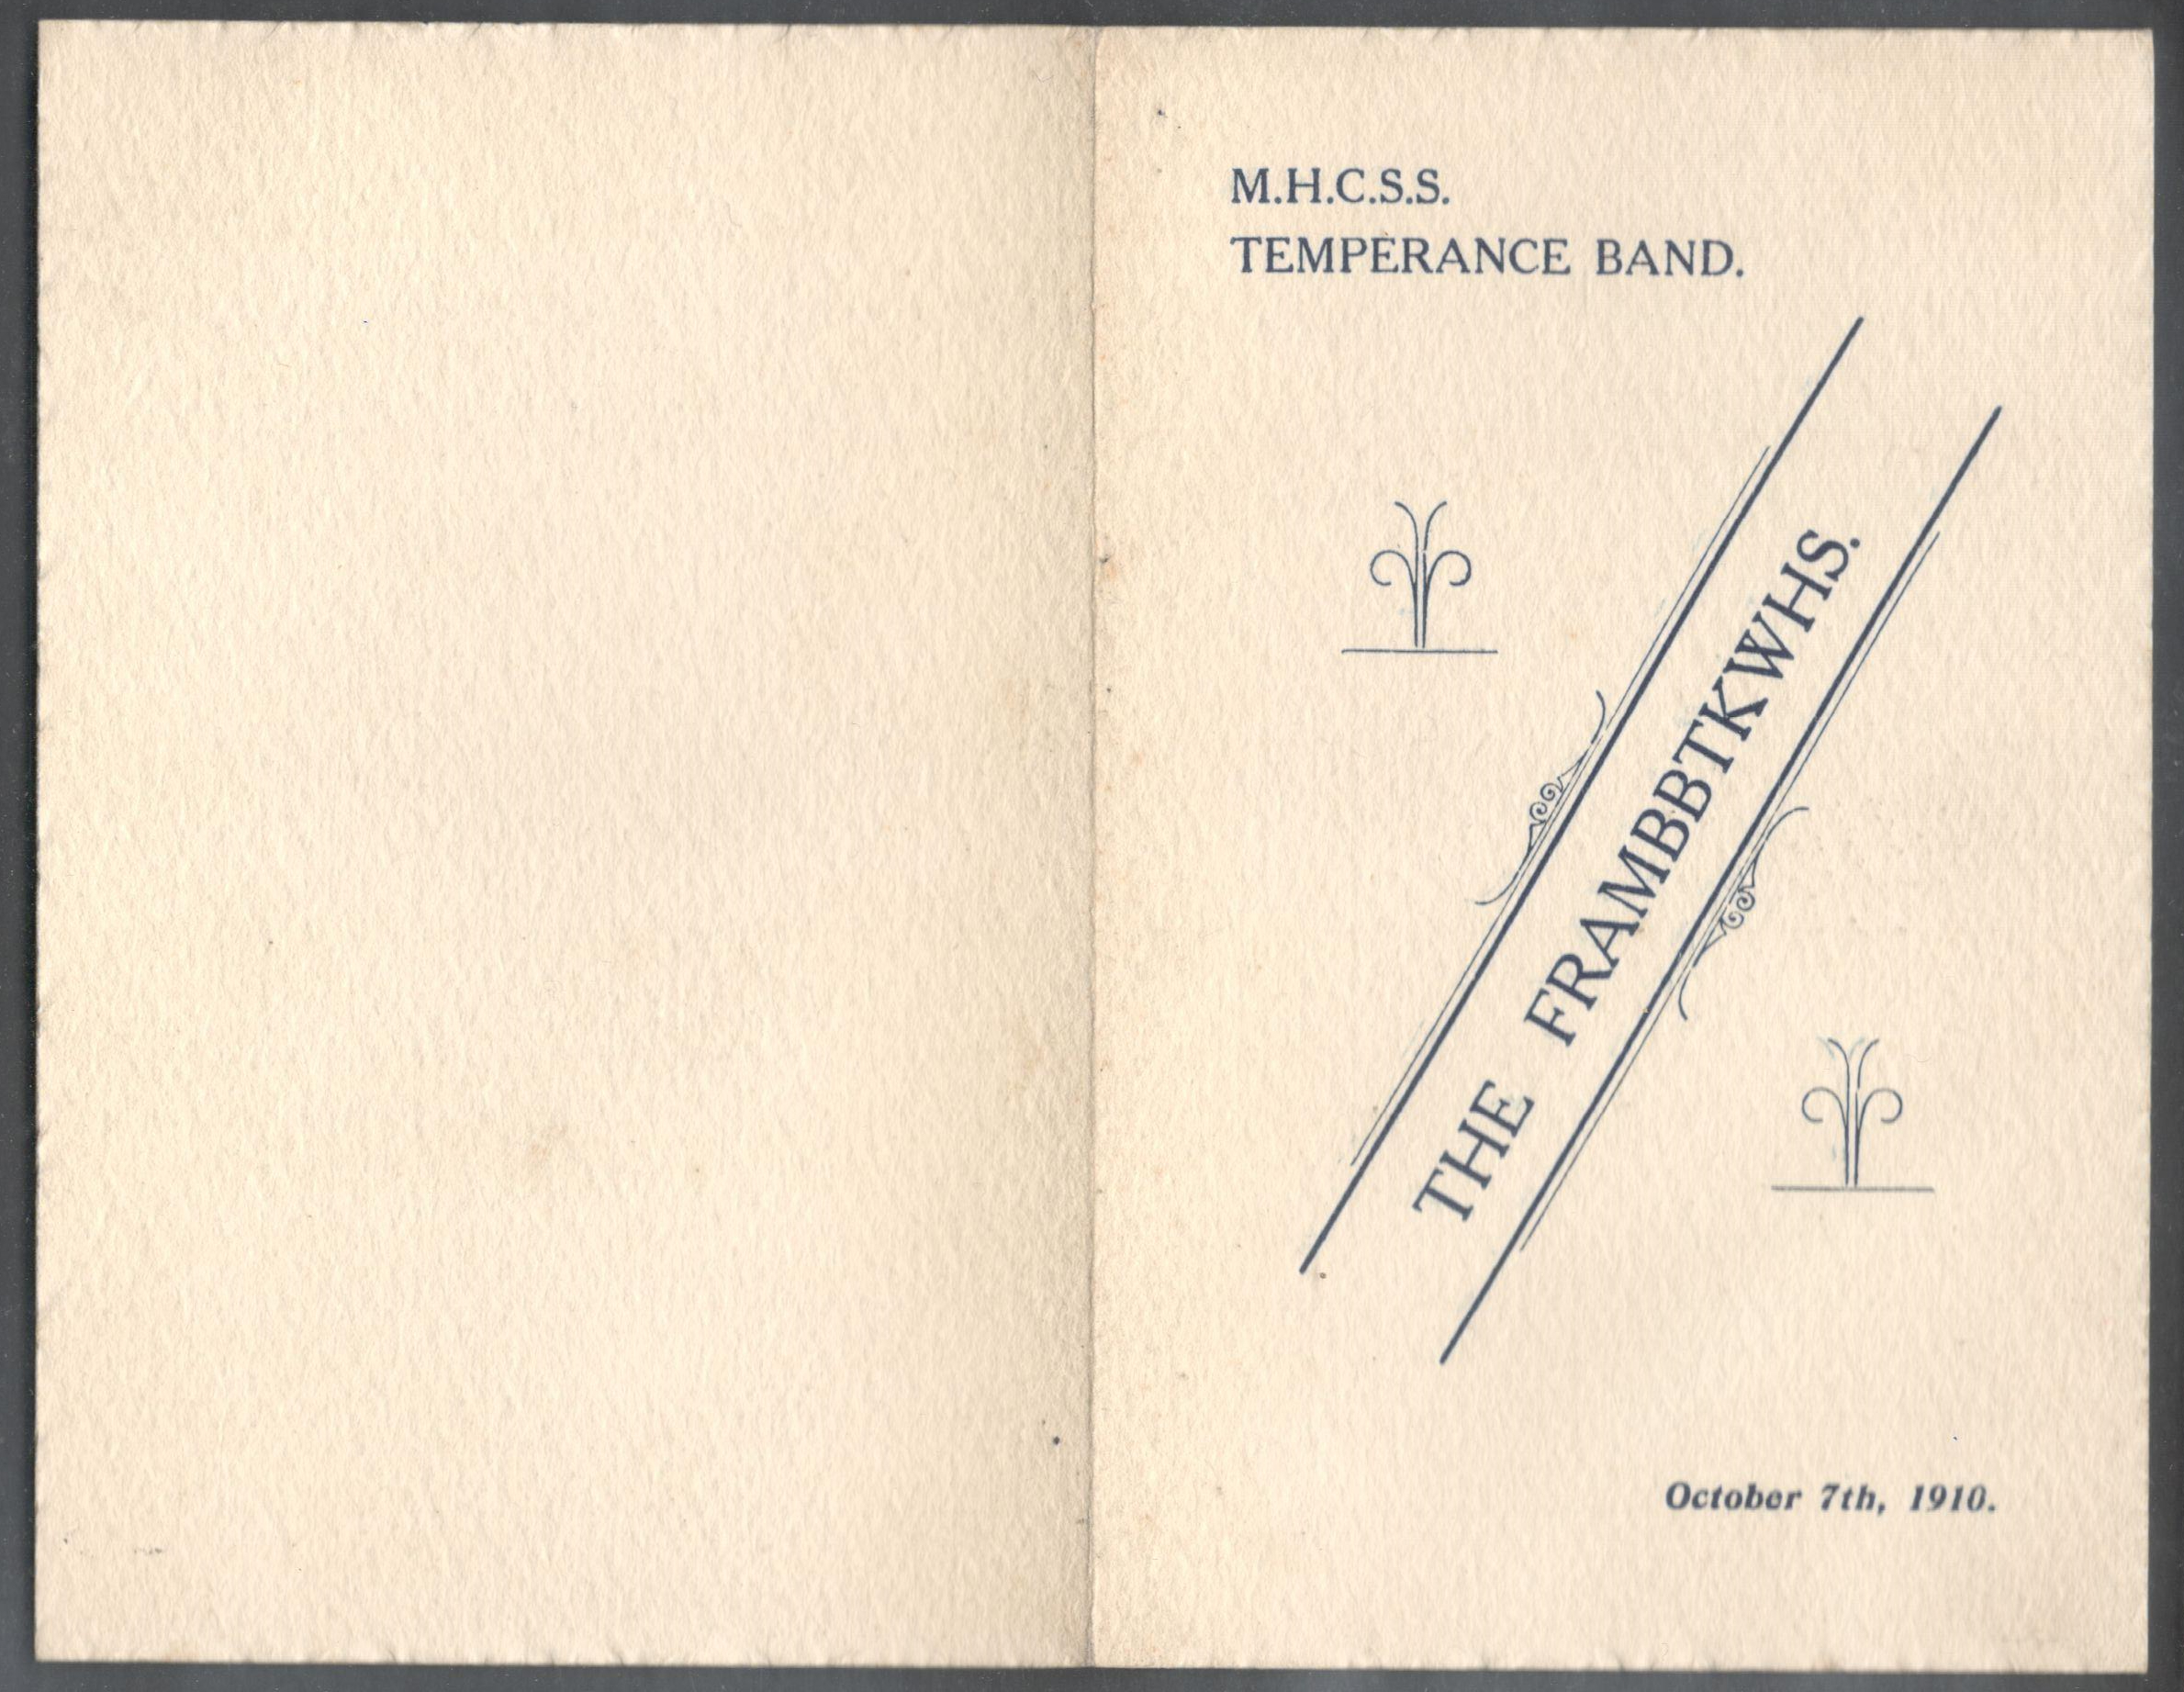 M.H.C.S.S. TEMPERANCE BAND 1910 THE FRAMBBTKWHS PROGRAMME